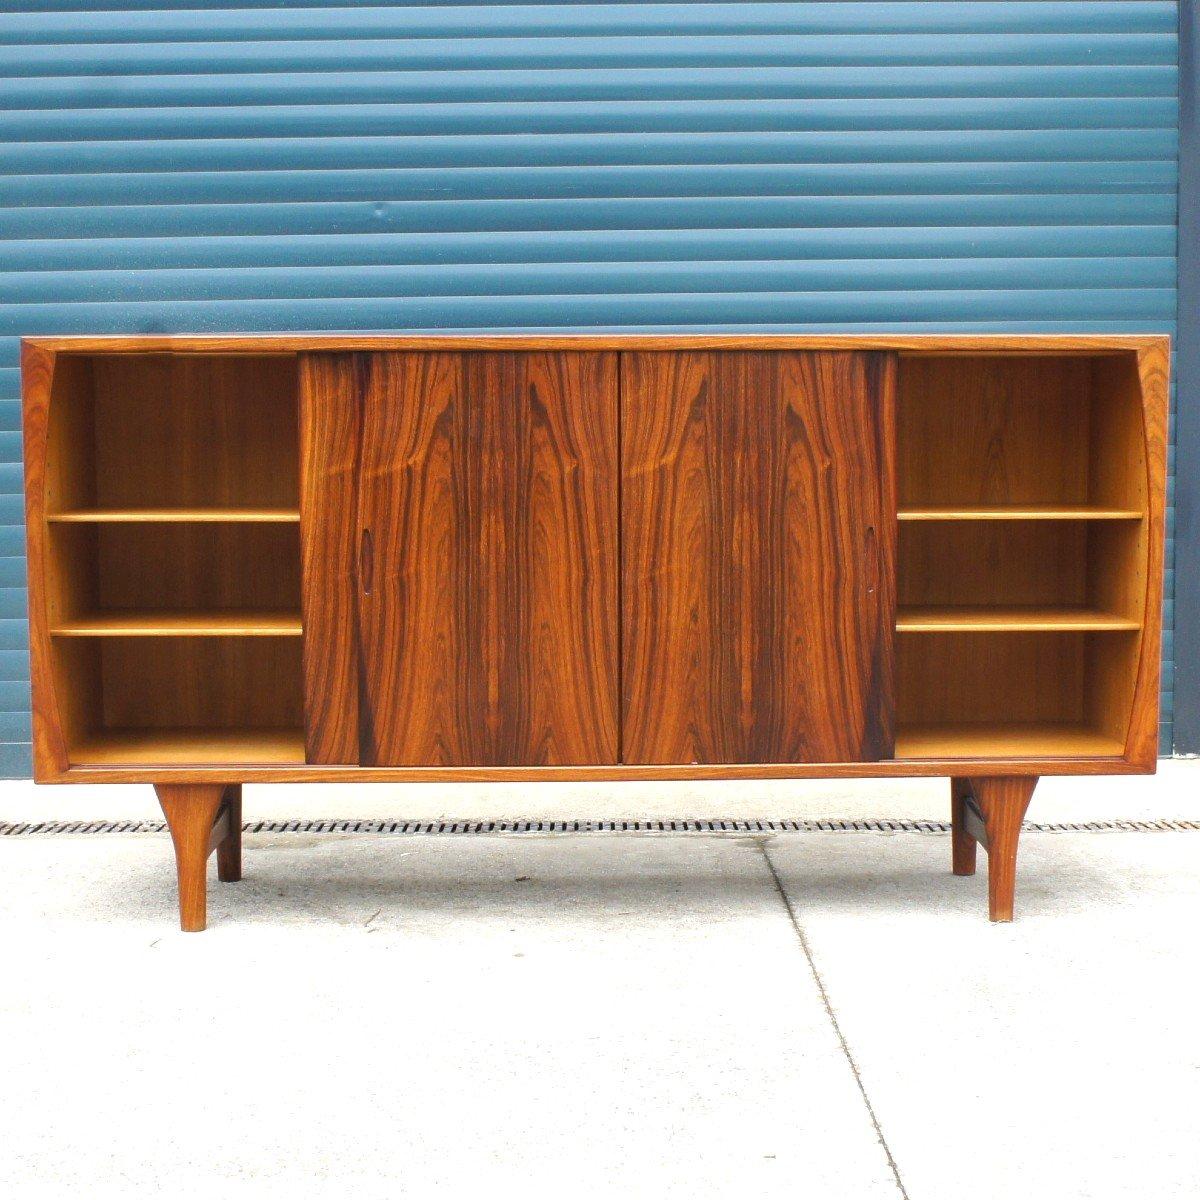 Mid century scandinavian sideboard made of rosewood from Rio. It has four sliding doors opening on a storage module of three shelves and several drawers made of light oak. It is a sober piece of furniture, with a pleasant colour contrast between the